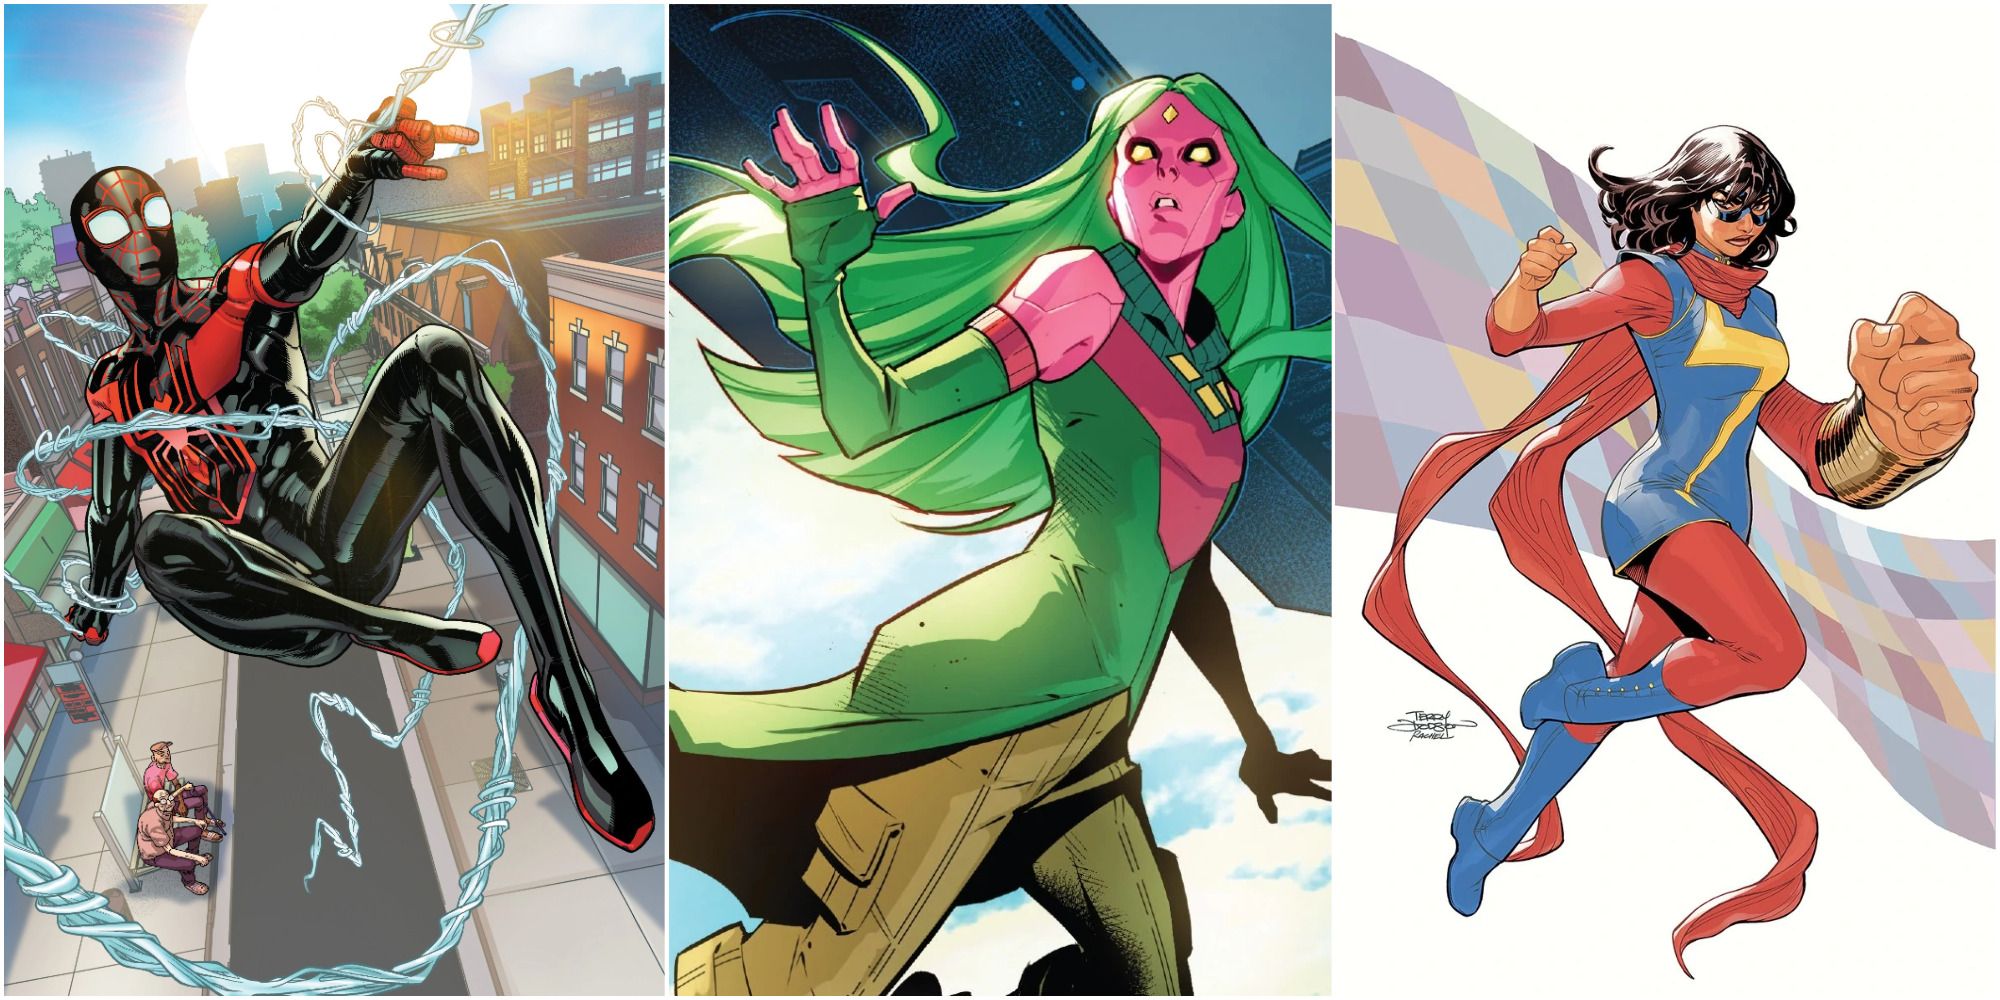 Marvel's Most Powerful Sidekicks: Spider-Man, Viv Vision, and Ms. Marvel header image with characters side by side